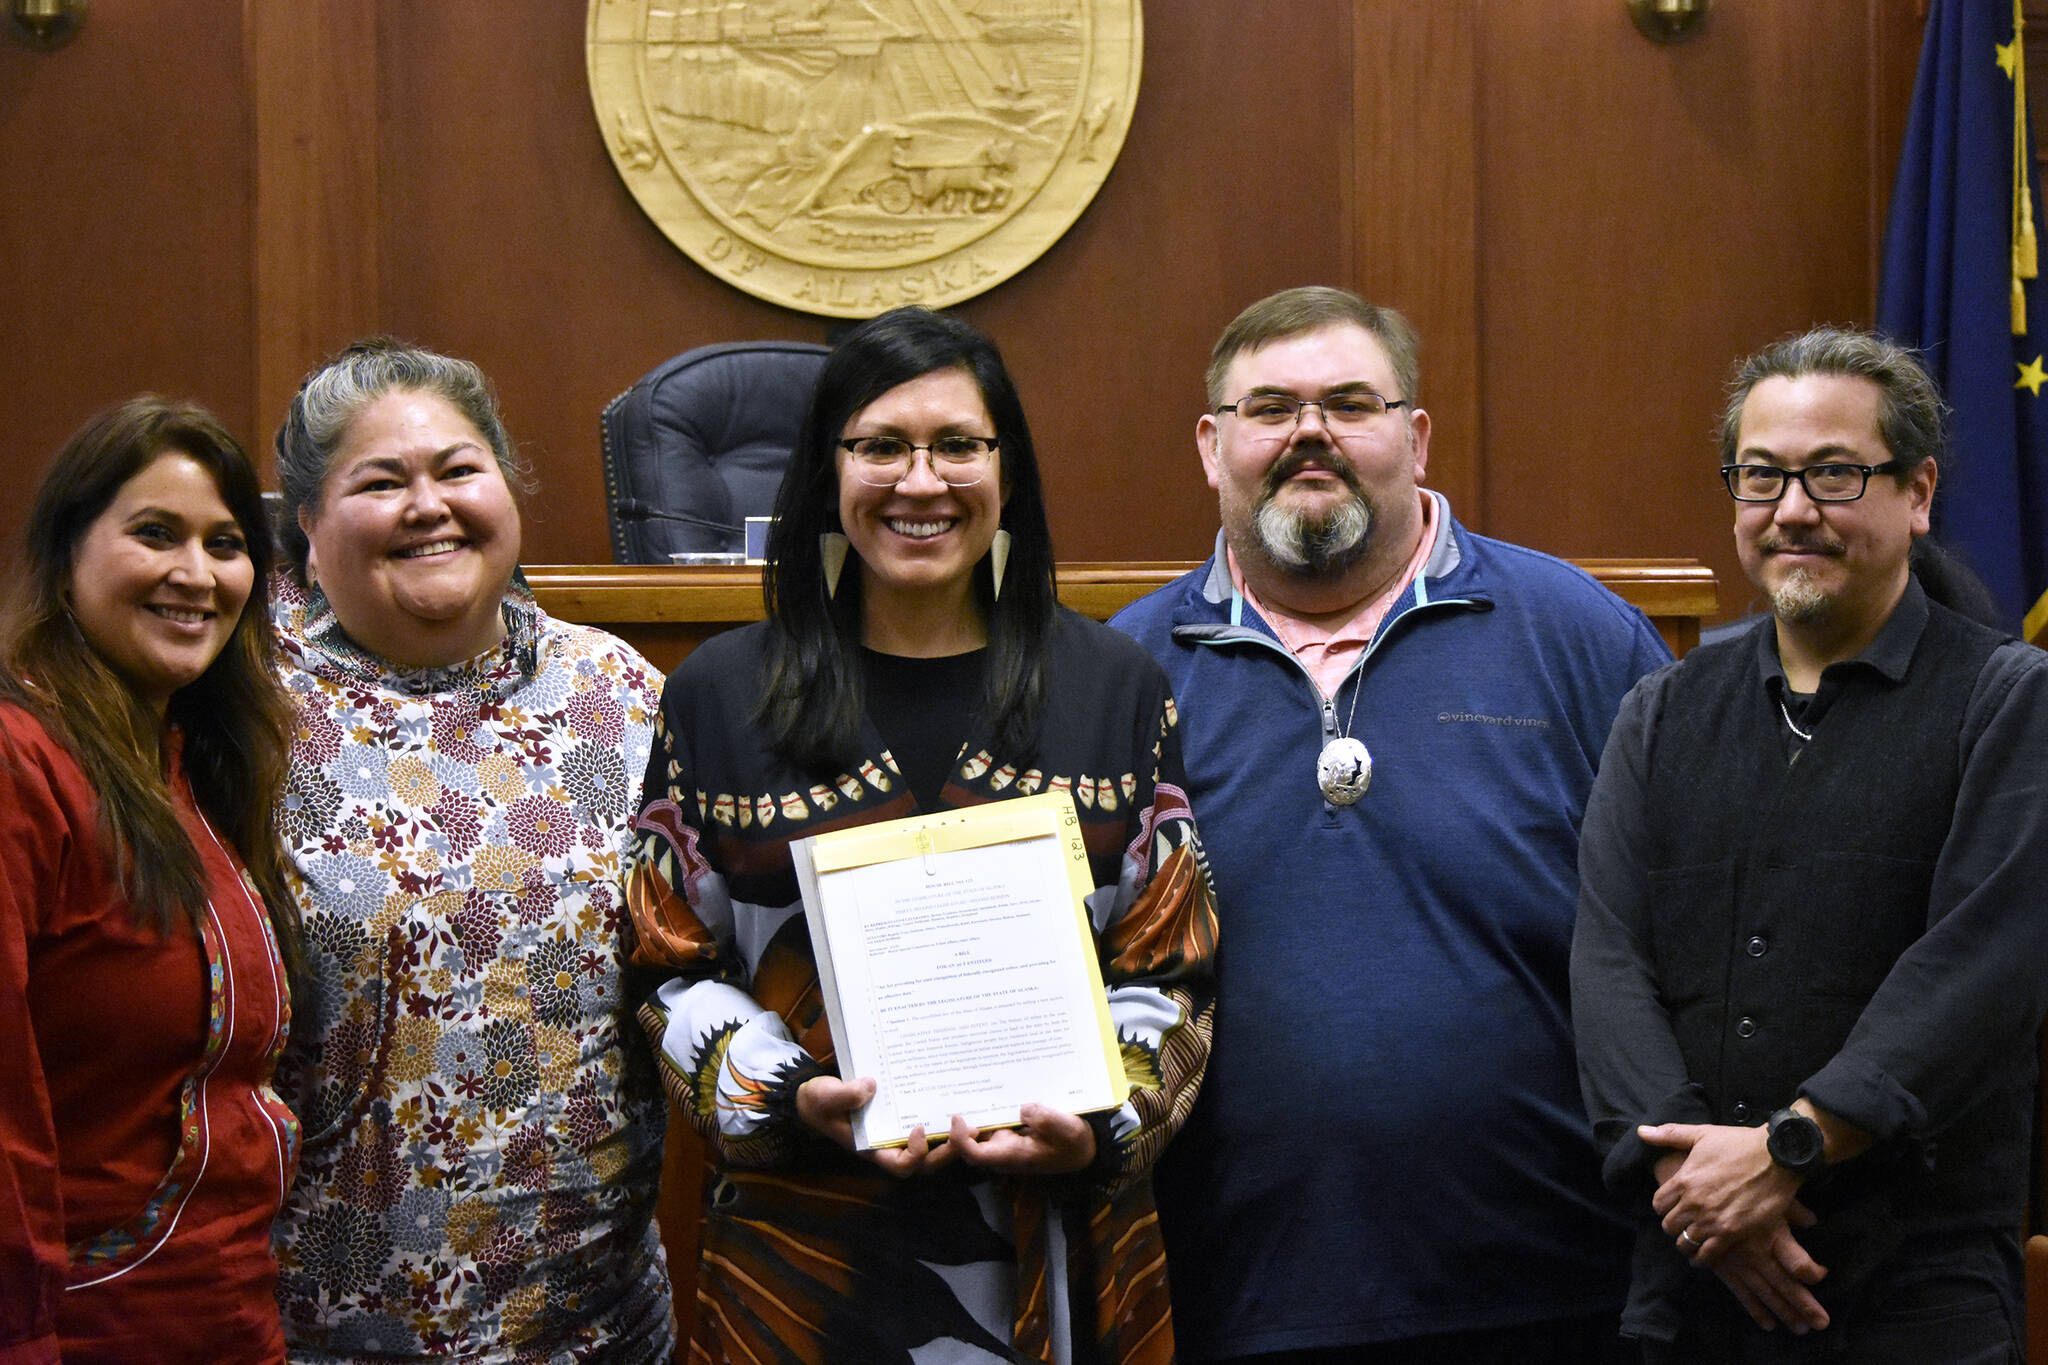 From left to right, ‘Wáahlaal Gidáak Barbara Blake, La quen náay Liz Medicine Crow, Rep. Tiffany Zulkowsky, D-Bethel; Richard Chalyee Éesh Peterson and Joe Nelson on Friday, May 13, 2022, pose with the text of House Bill 123, a bill sponsored by Zulkosky to have the state formally recognize Alaska’s 229 federally-recognized tribes. (Peter Segall / Juneau Empire)